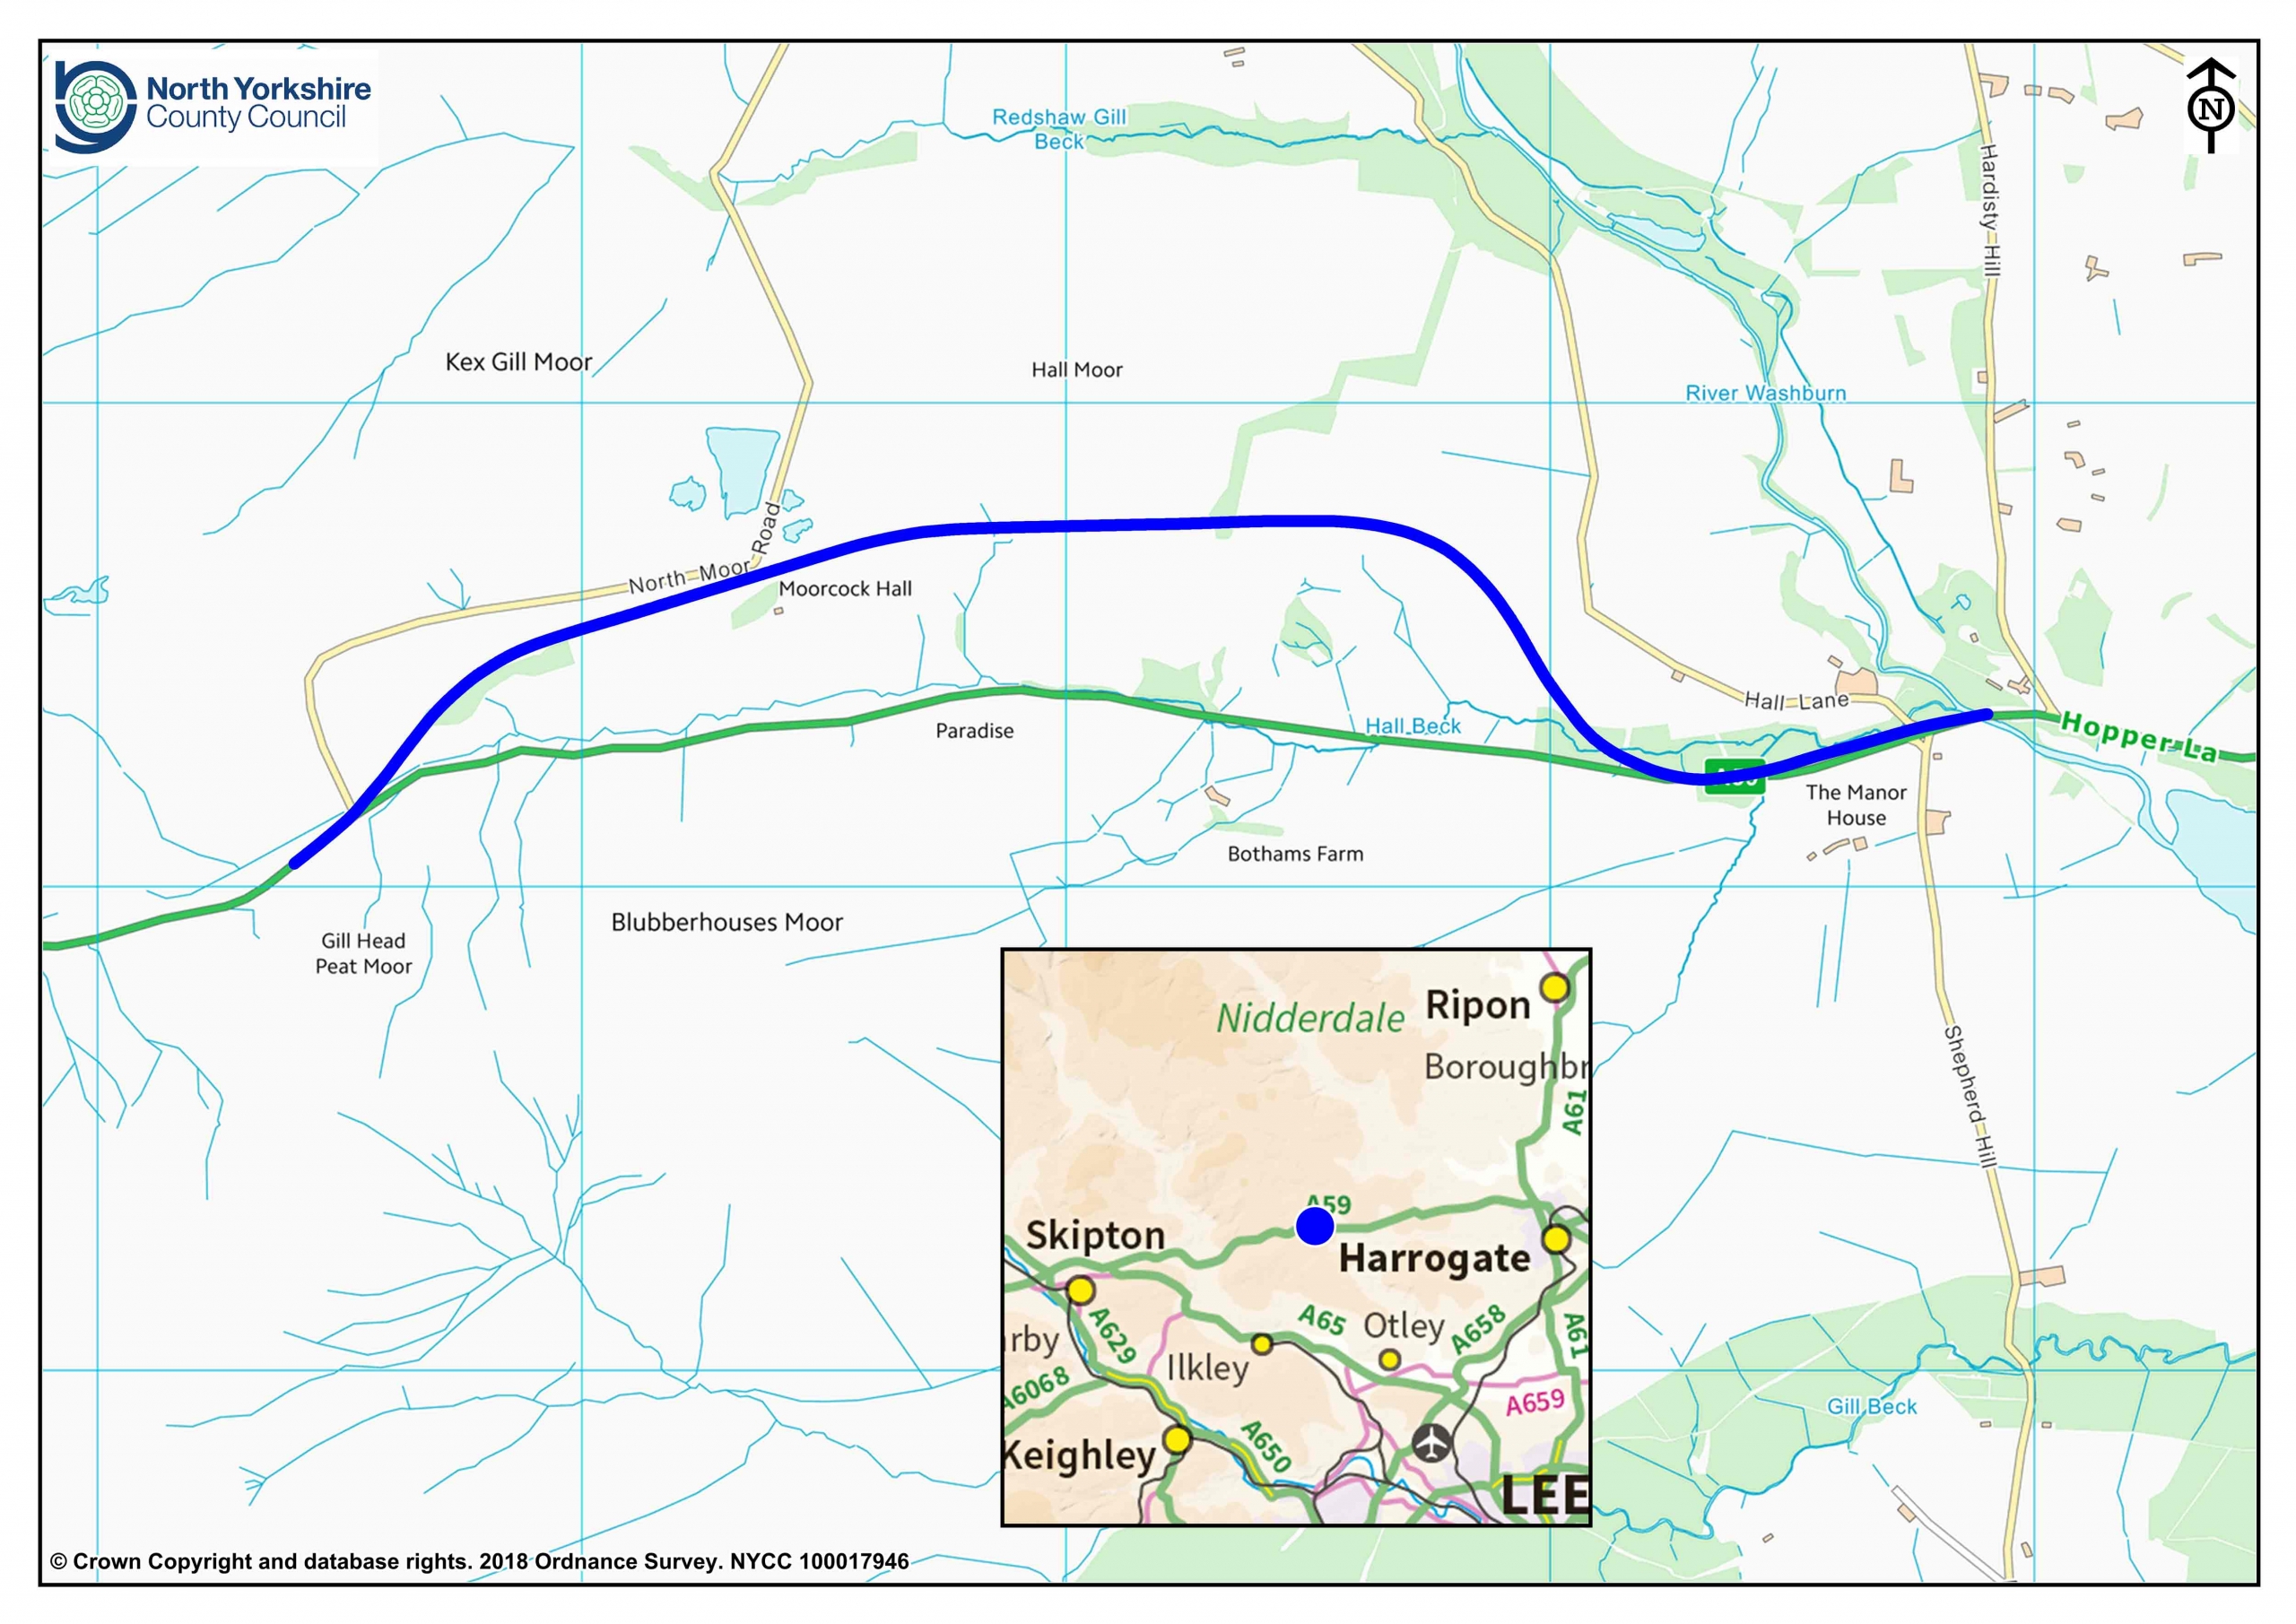 The map shows the proposed preferred route for the realignment of the A59 at Kex Gill